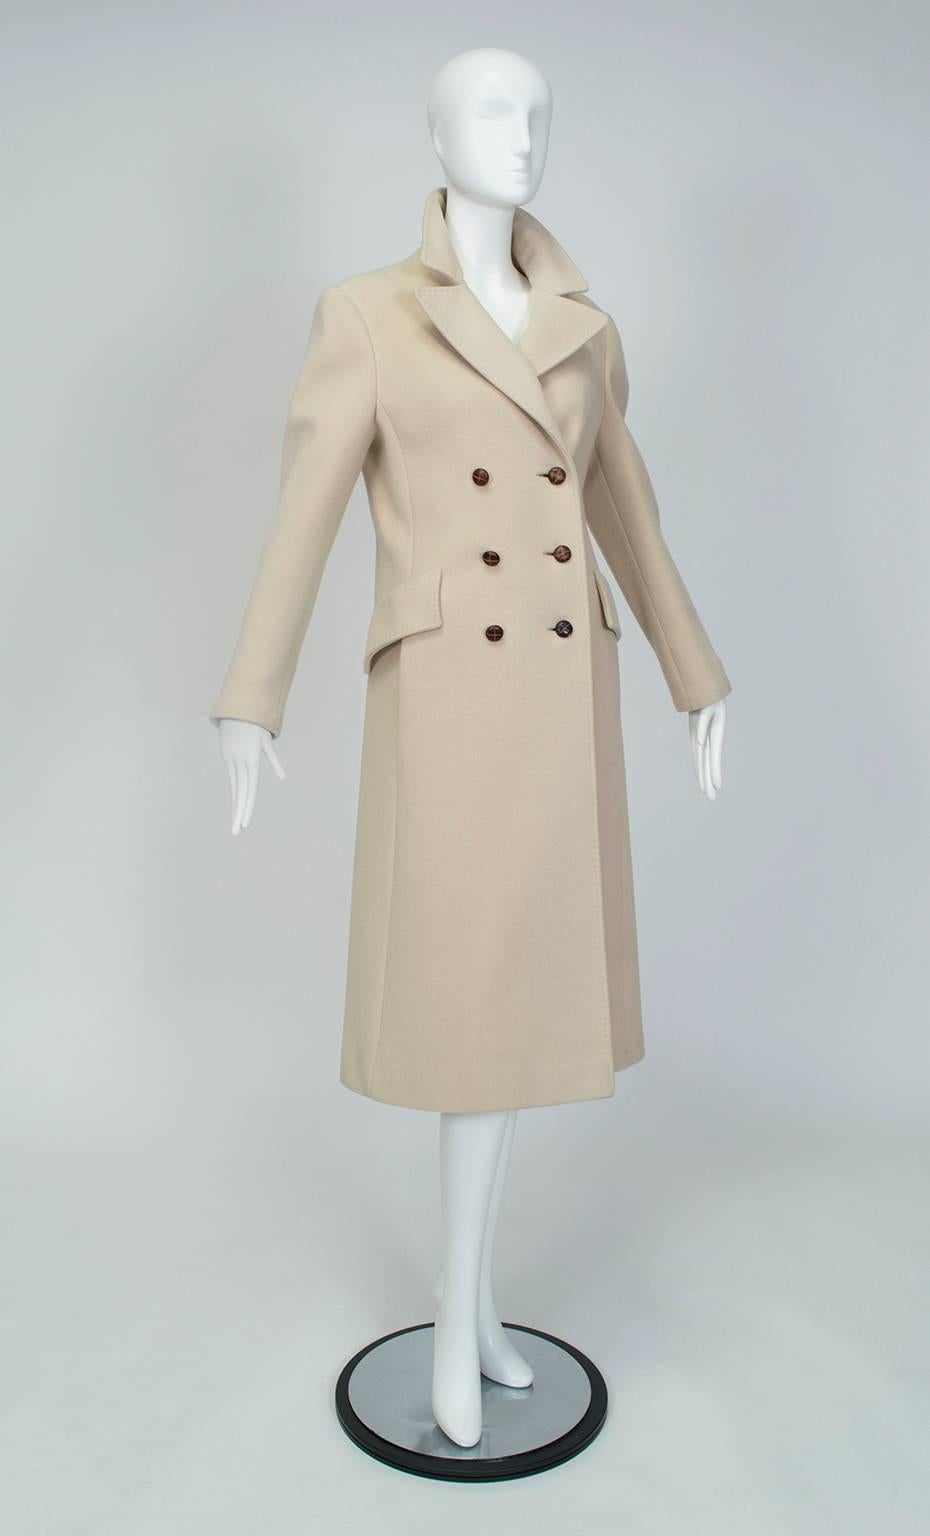 A classic trench is on every well-dressed woman's Top 10 list for good reason: its military masculinity makes the woman underneath even more feminine. With its lean film noir styling, elegant top stitching and luxe fabric, this trench is not only a